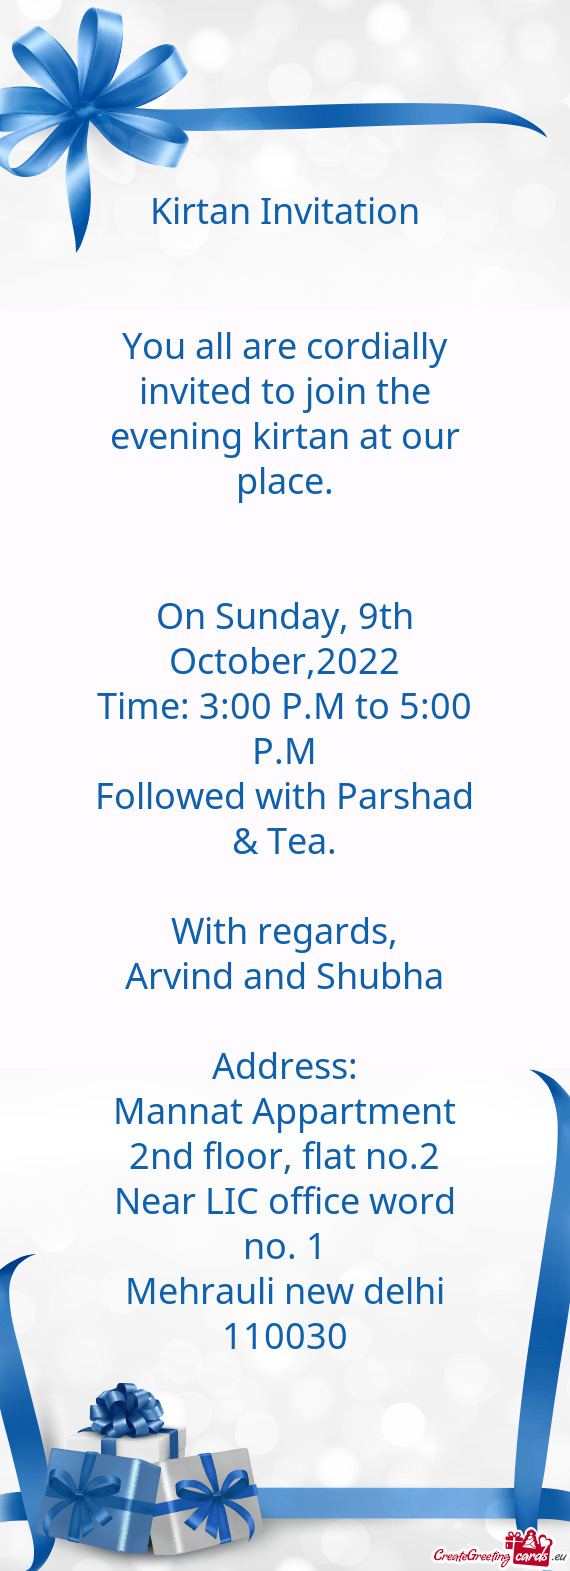 You all are cordially invited to join the evening kirtan at our place